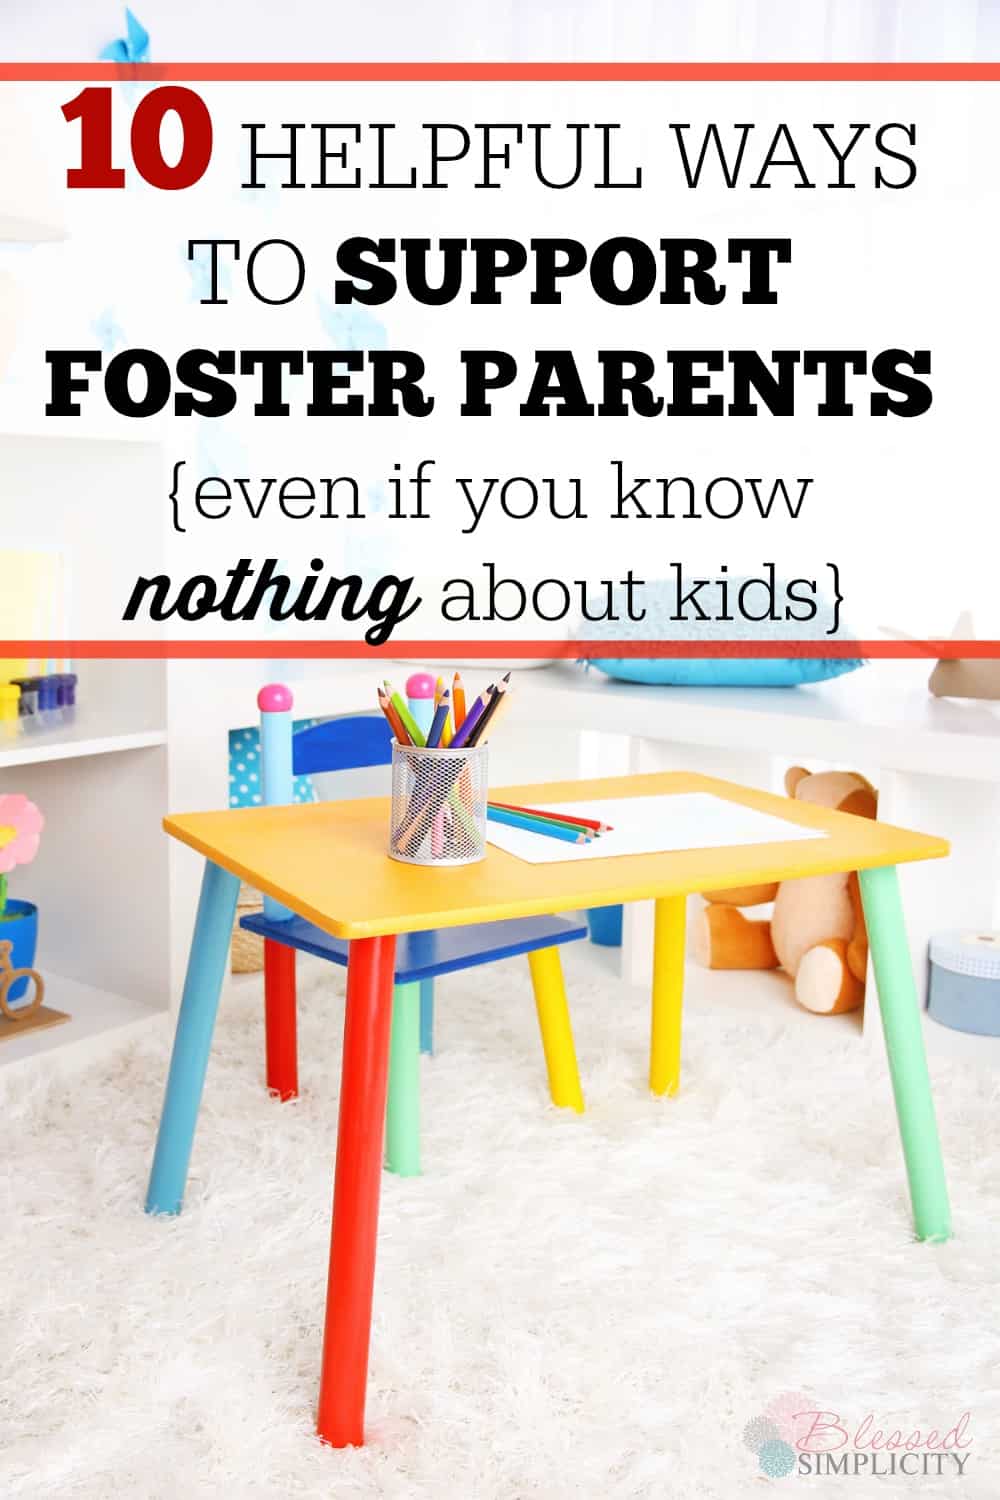 If you are looking for ways to support foster parents and foster children without actually fostering or being involved in the foster care system, here are 10 ways to do just that!!